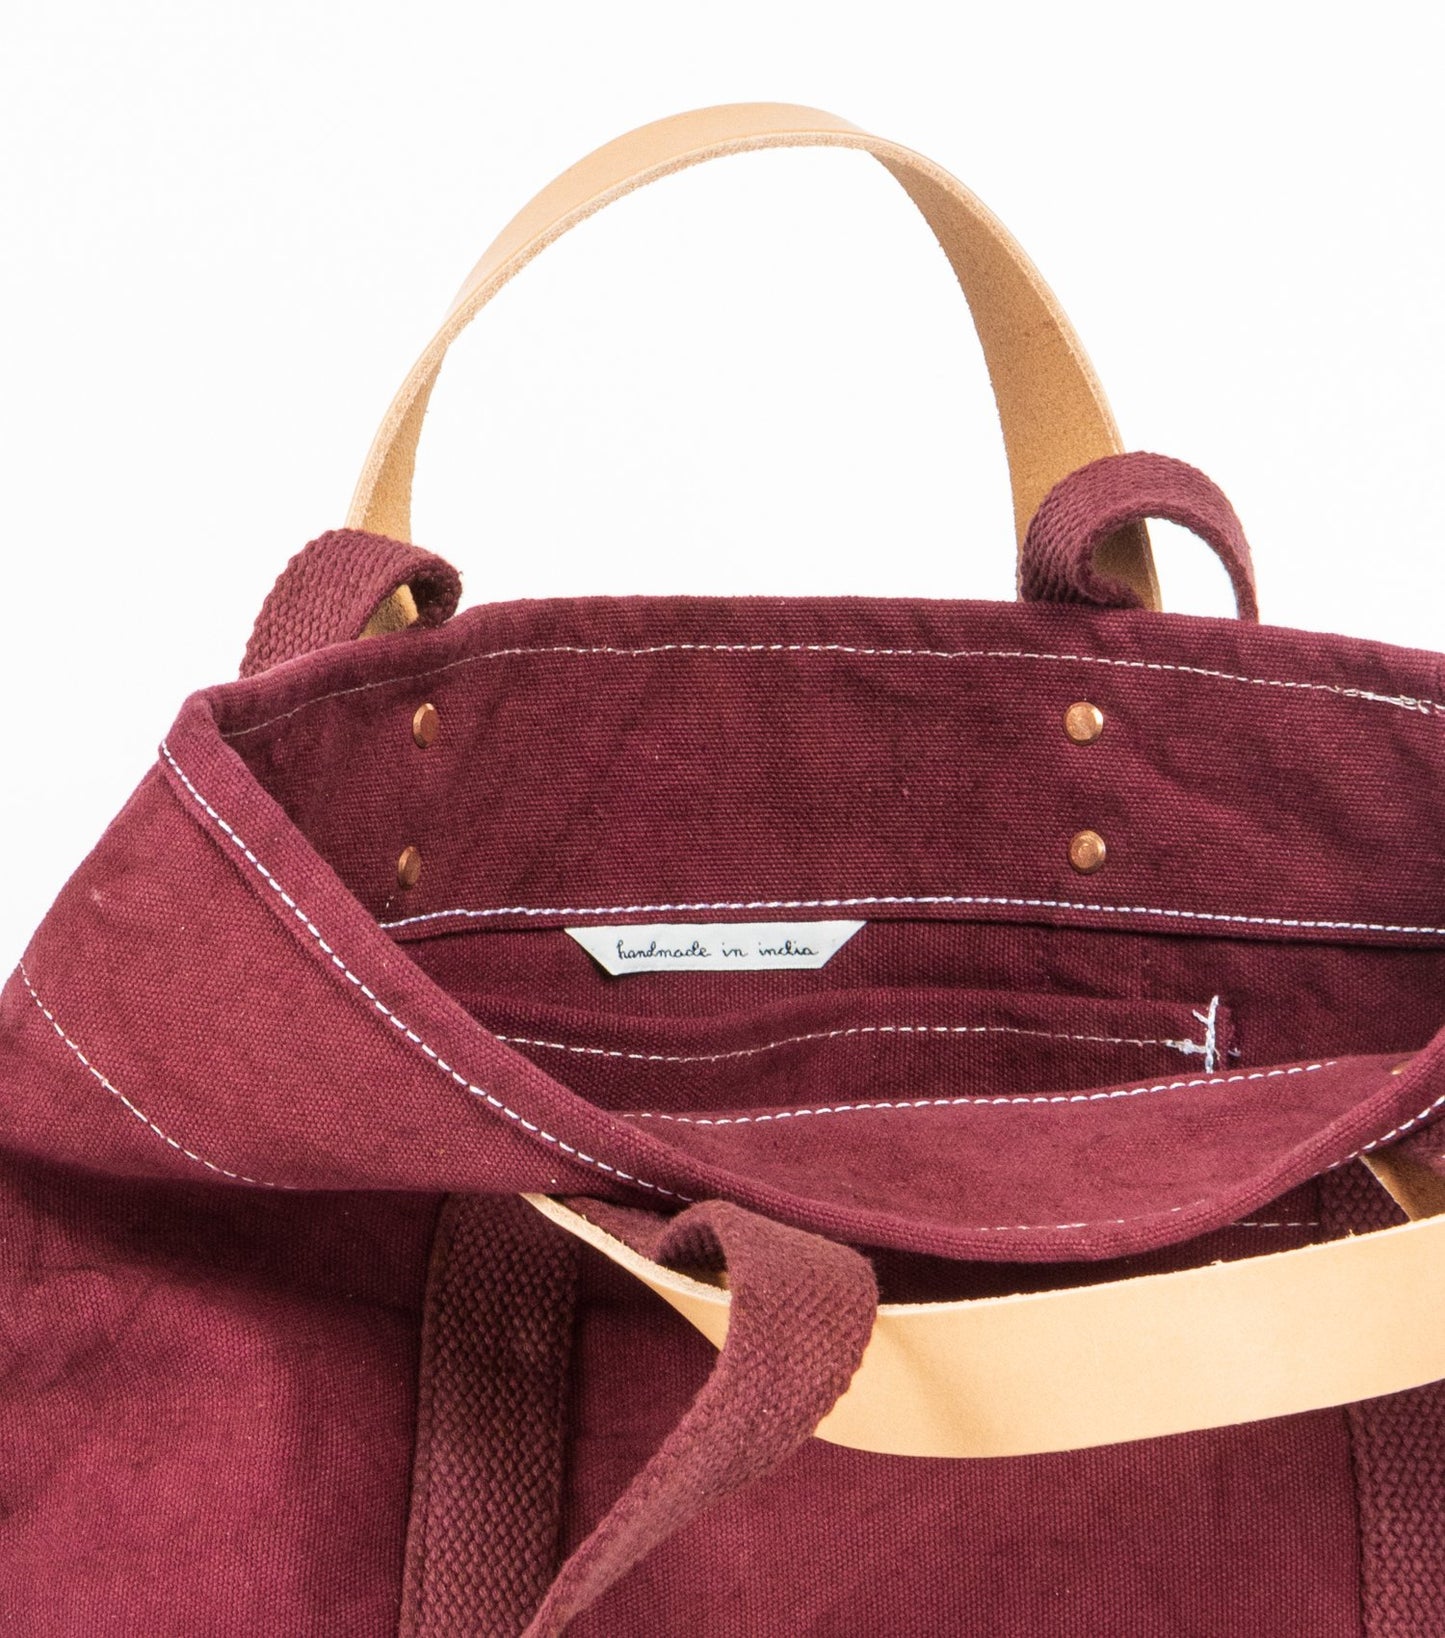 Lunch Tote, Plum